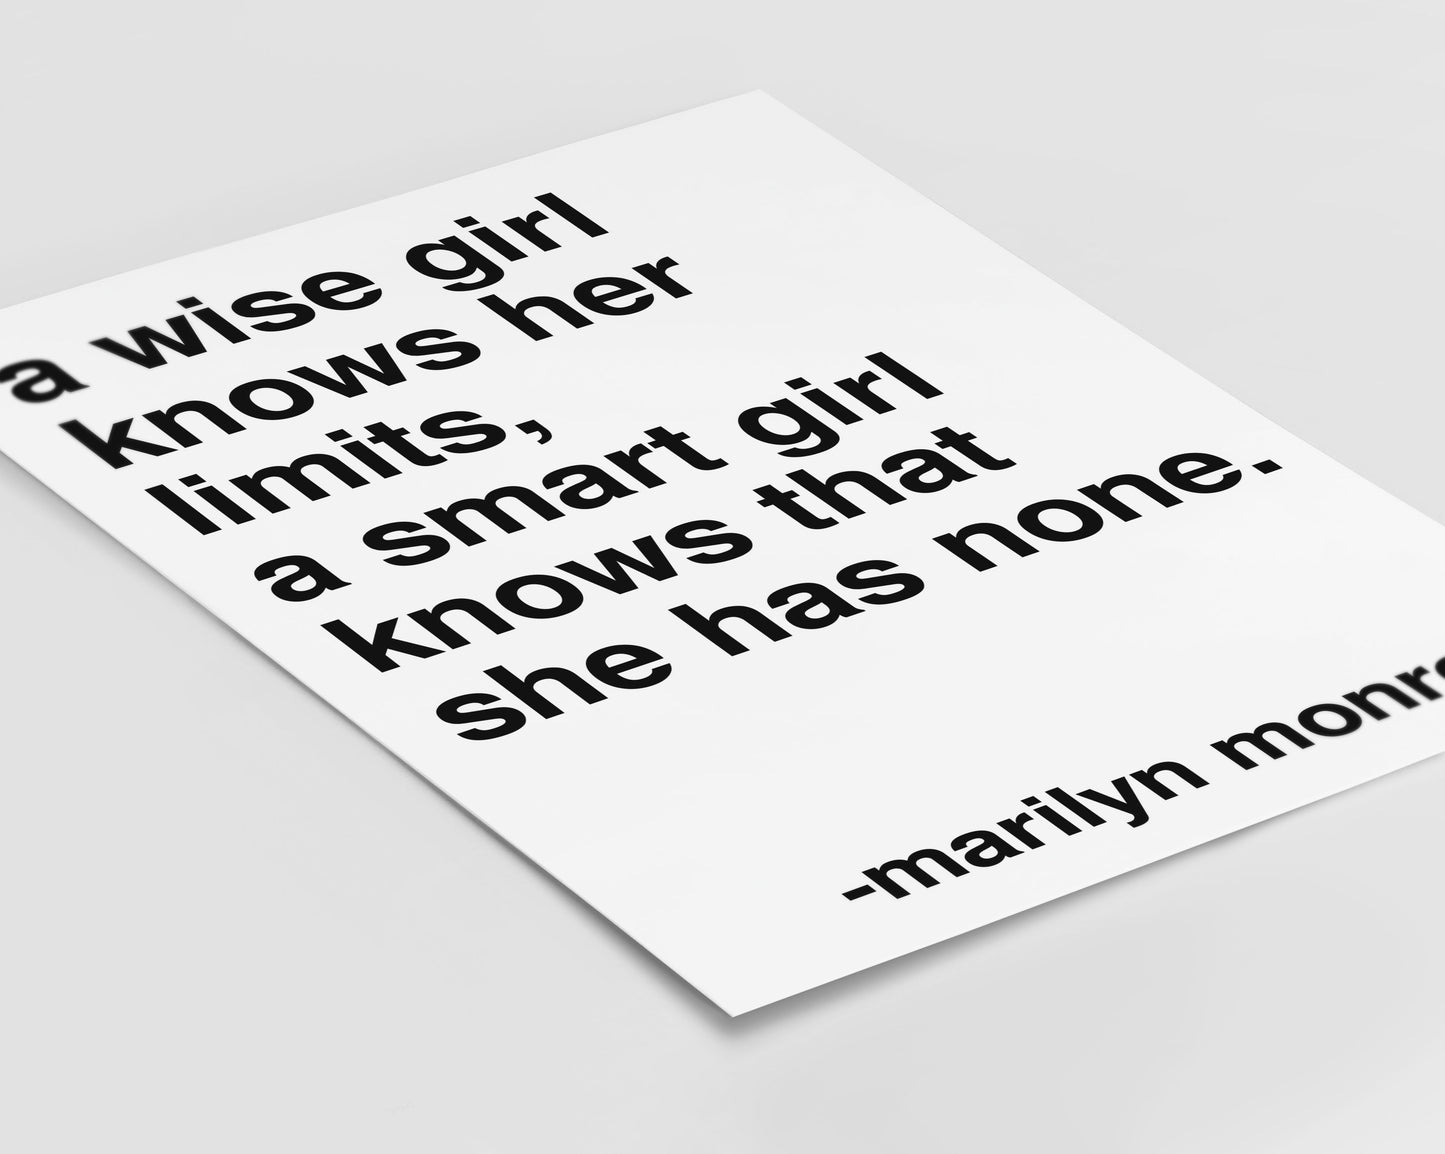 A Wise Girl Marilyn Monroe Statement White Print